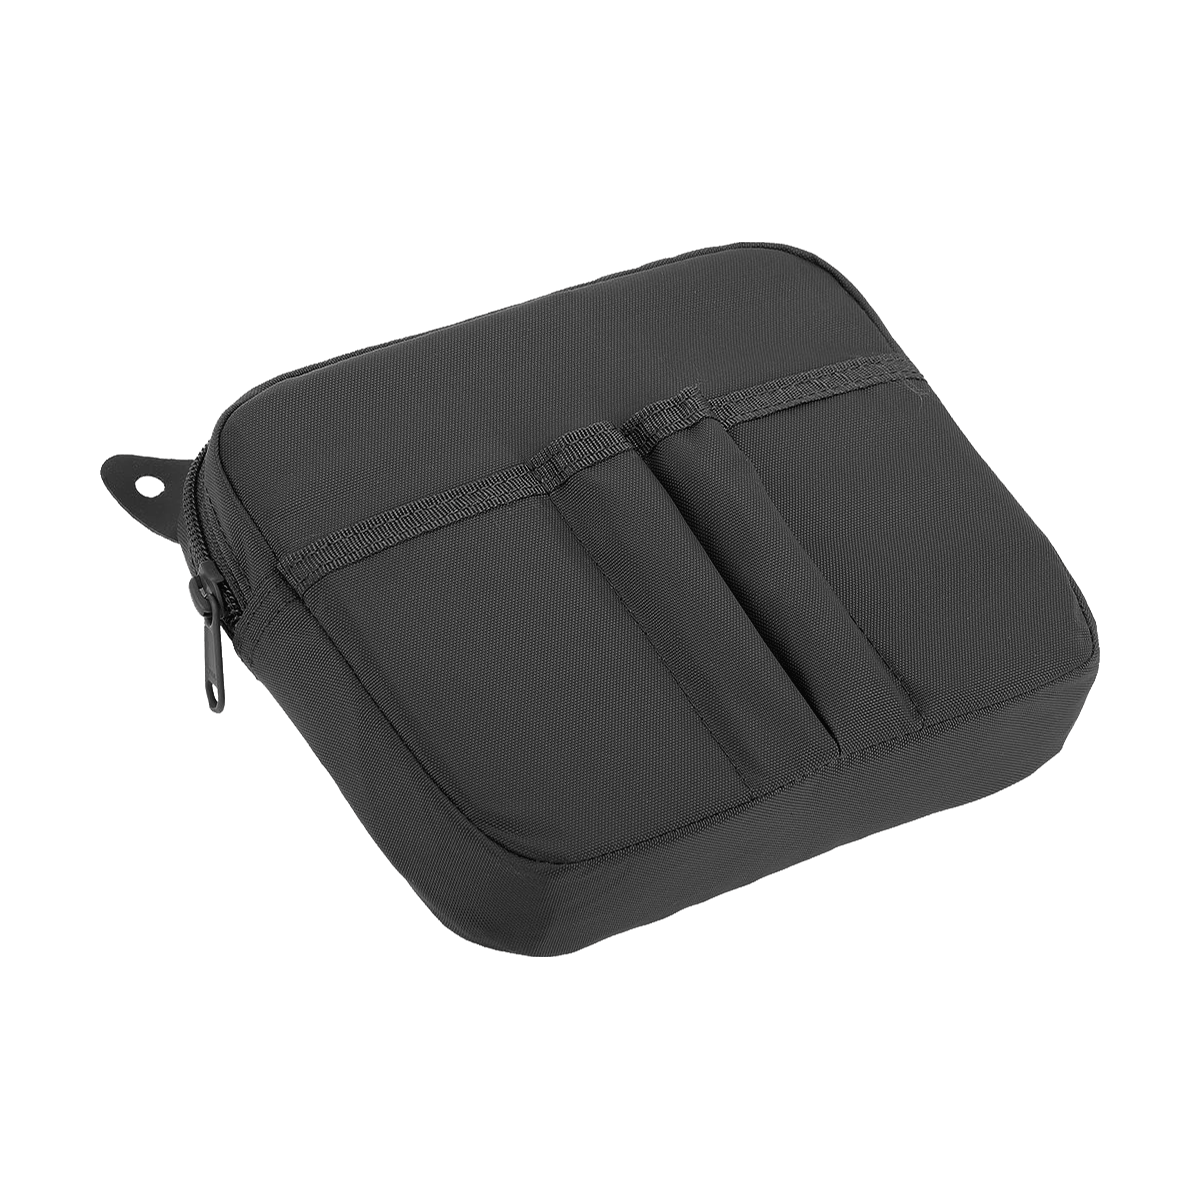 MAXPEDITION HOOK & LOOP POUCH